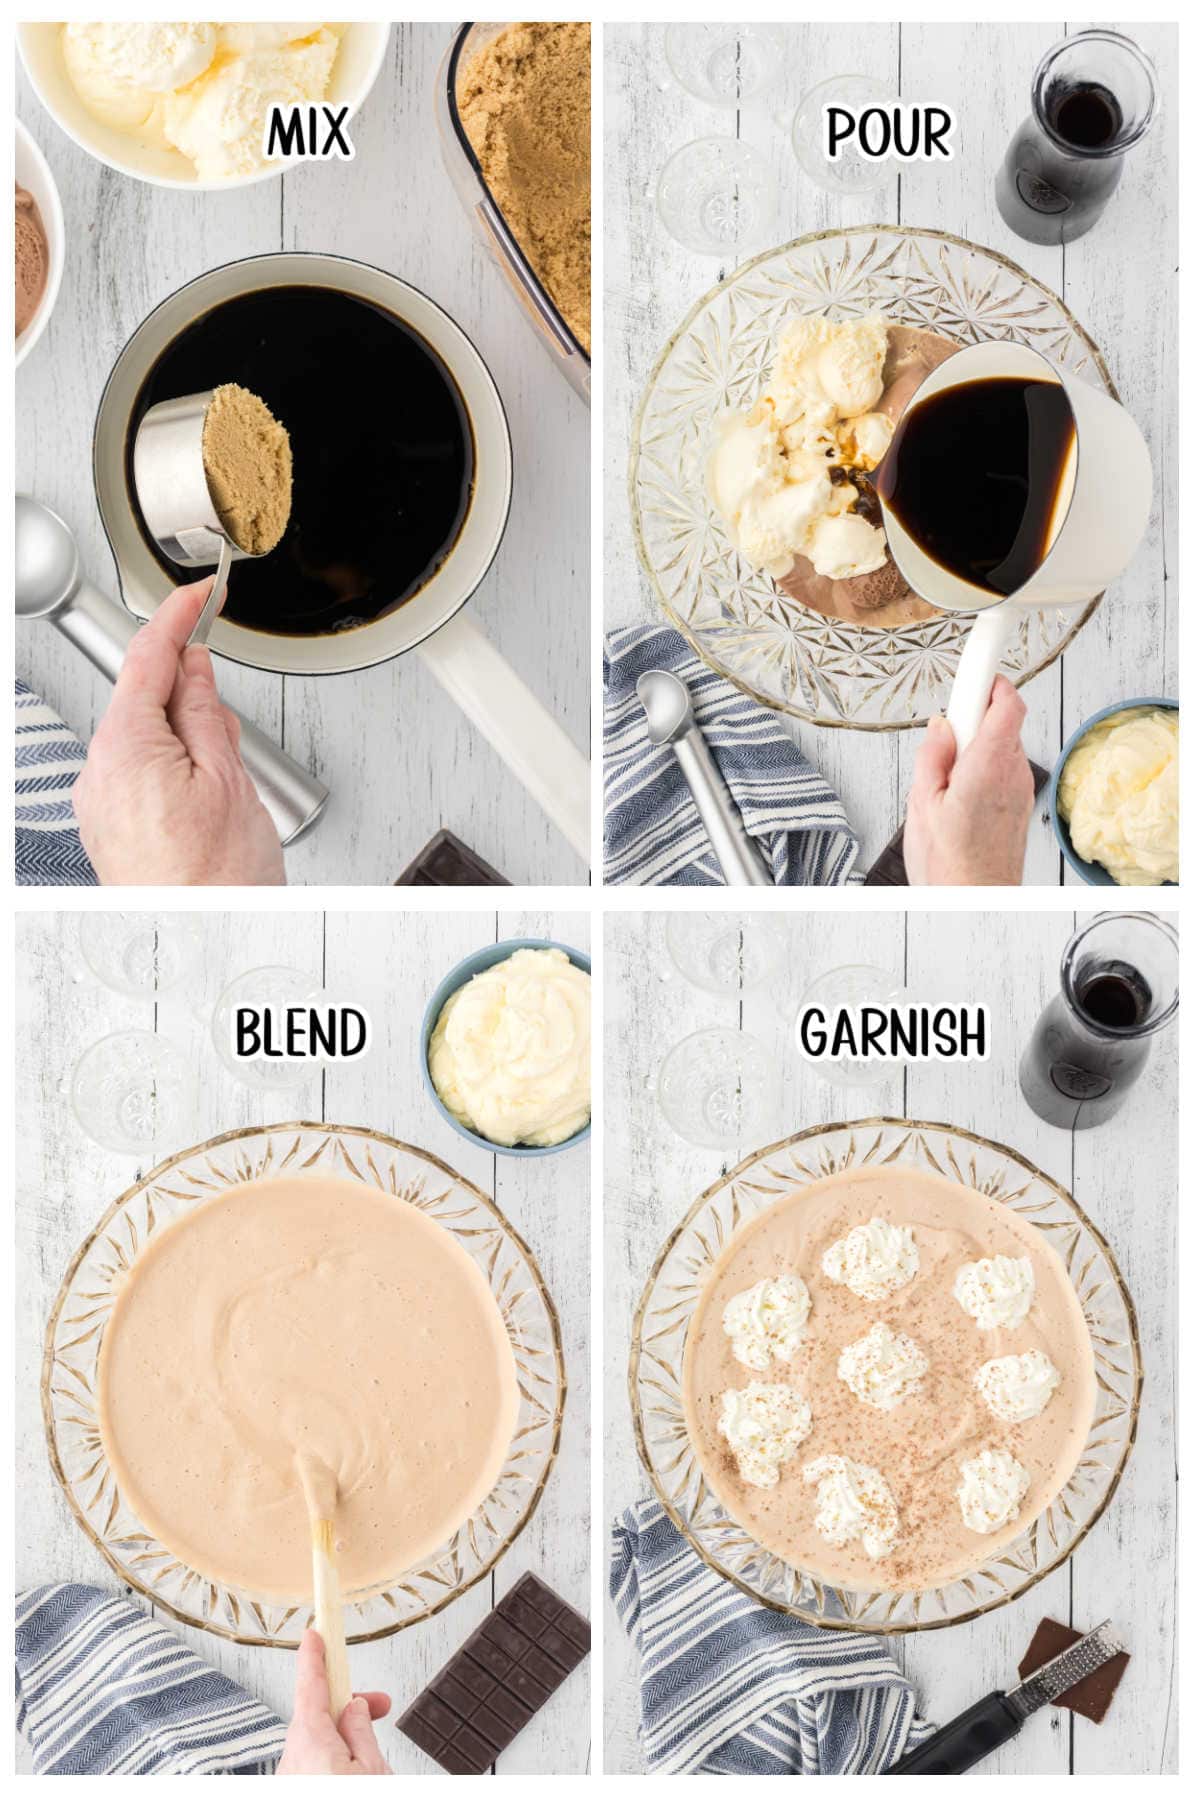 Step by step images showing how to make coffee punch.